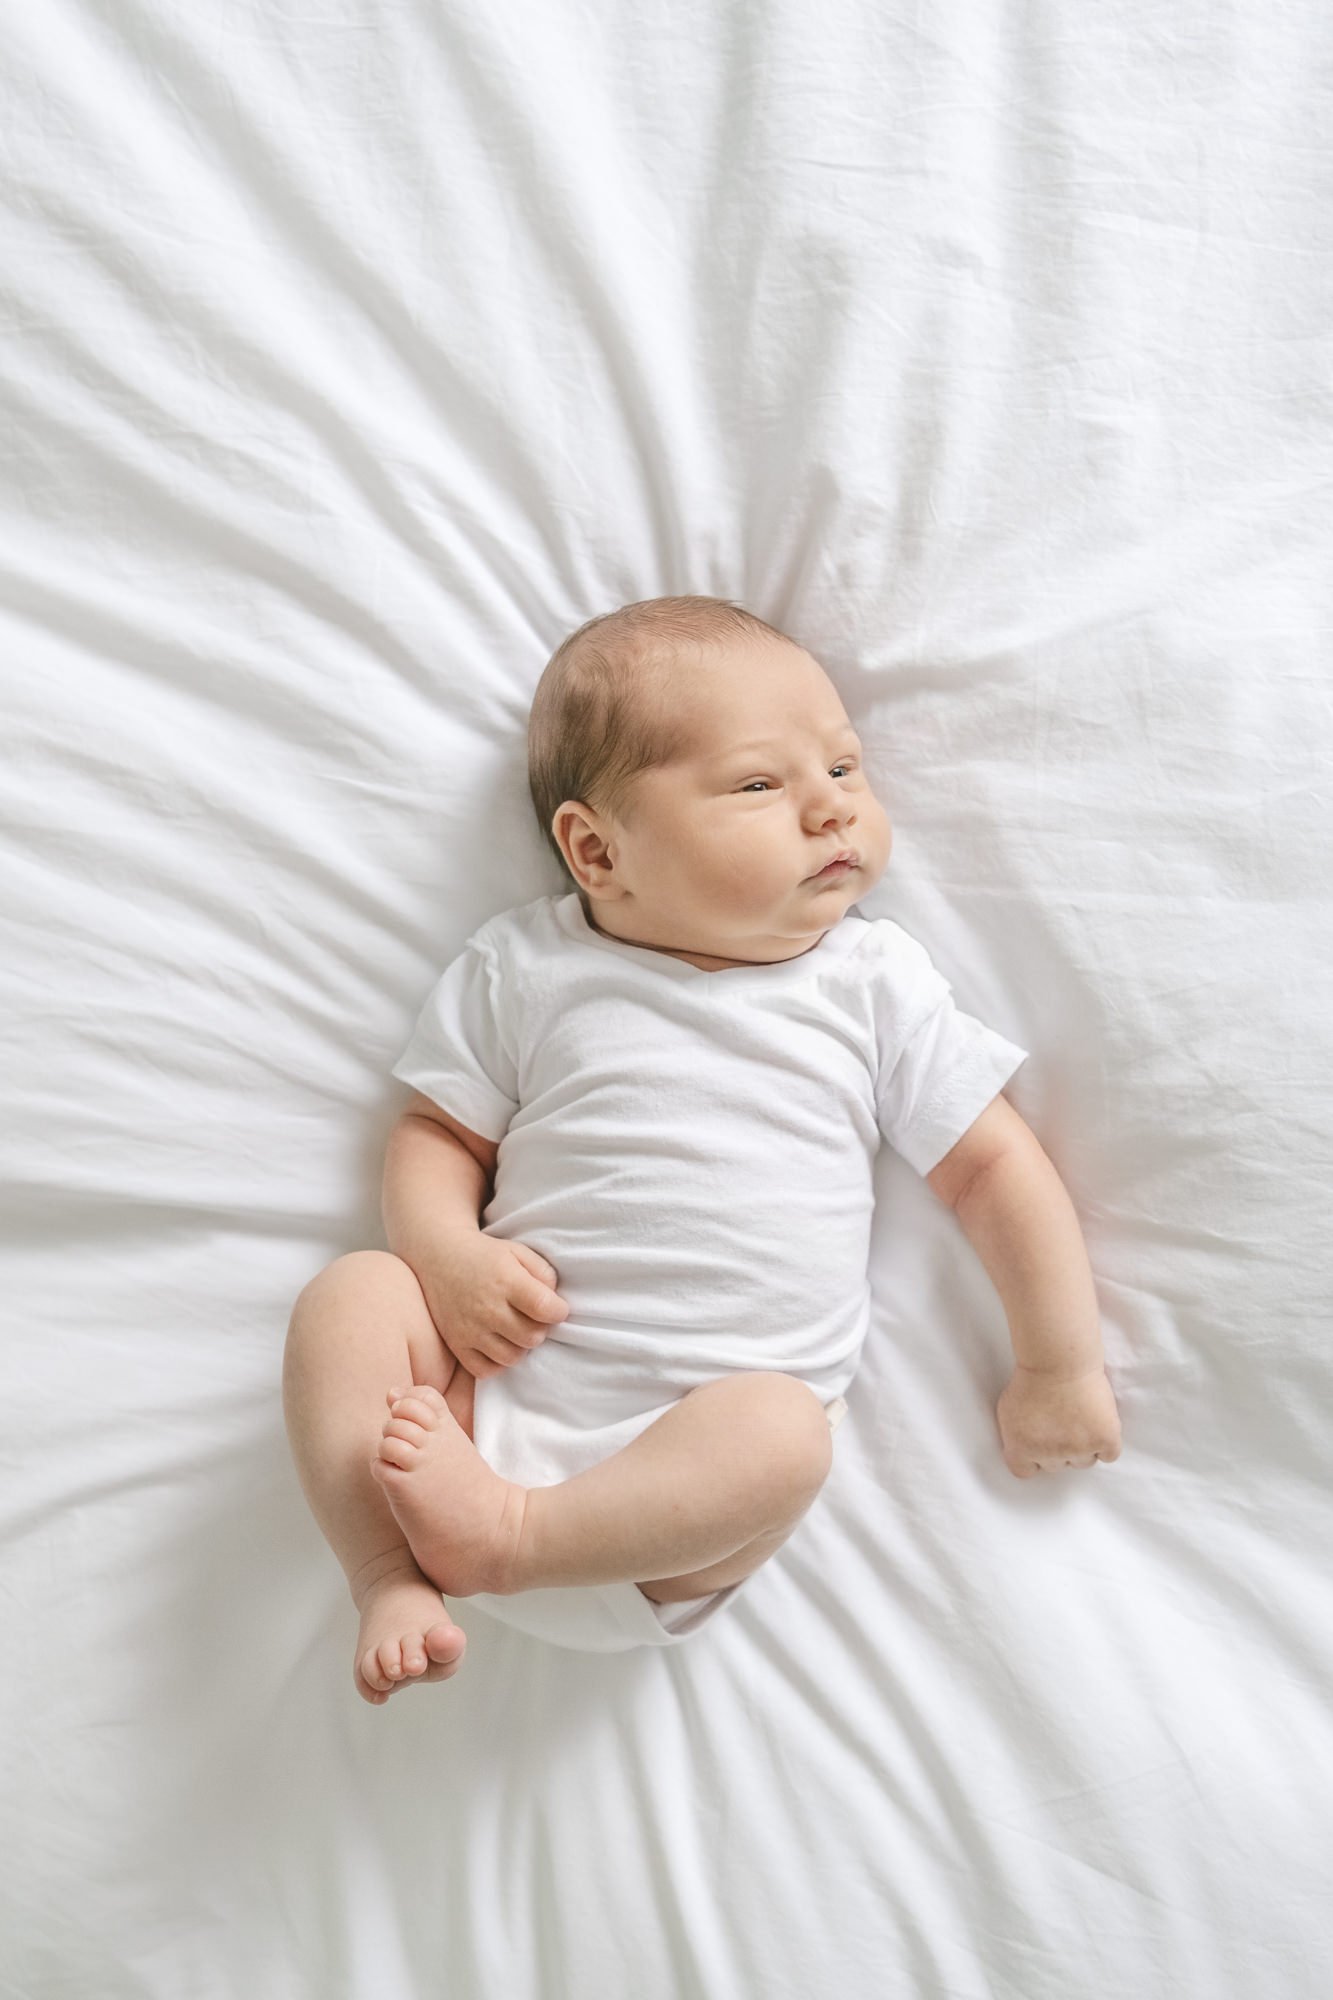  Newborn baby boy lays on a white down comforter while wearing a simple white onesie during his newborn portrait session. #candidposeinspo #newbornphotography #shorthillsphotographer #familyphotographersinnewjersey #inhomeportraits #newbornposeinspir